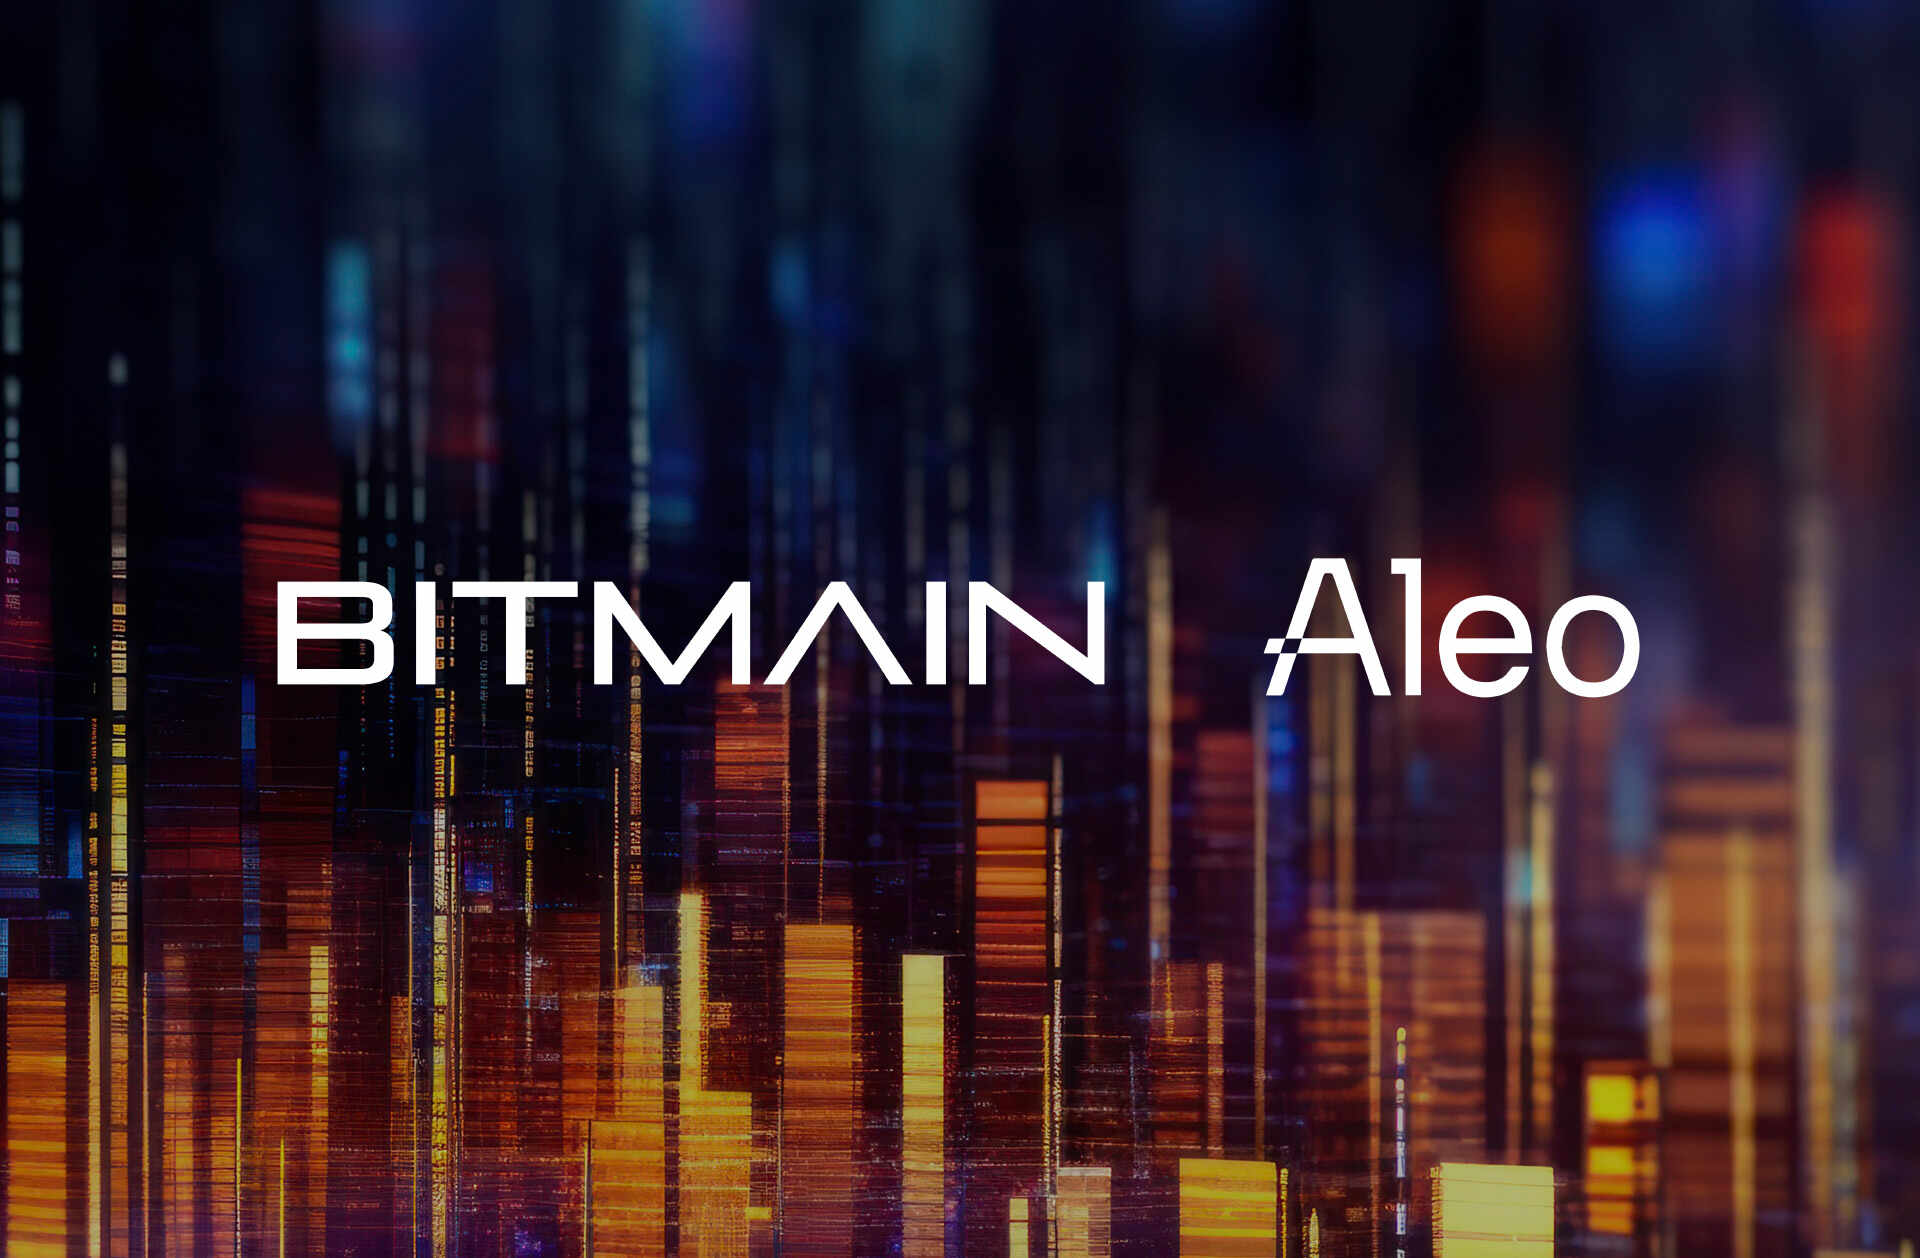 BITMAIN intends to introduce the Aleo ANTMINER